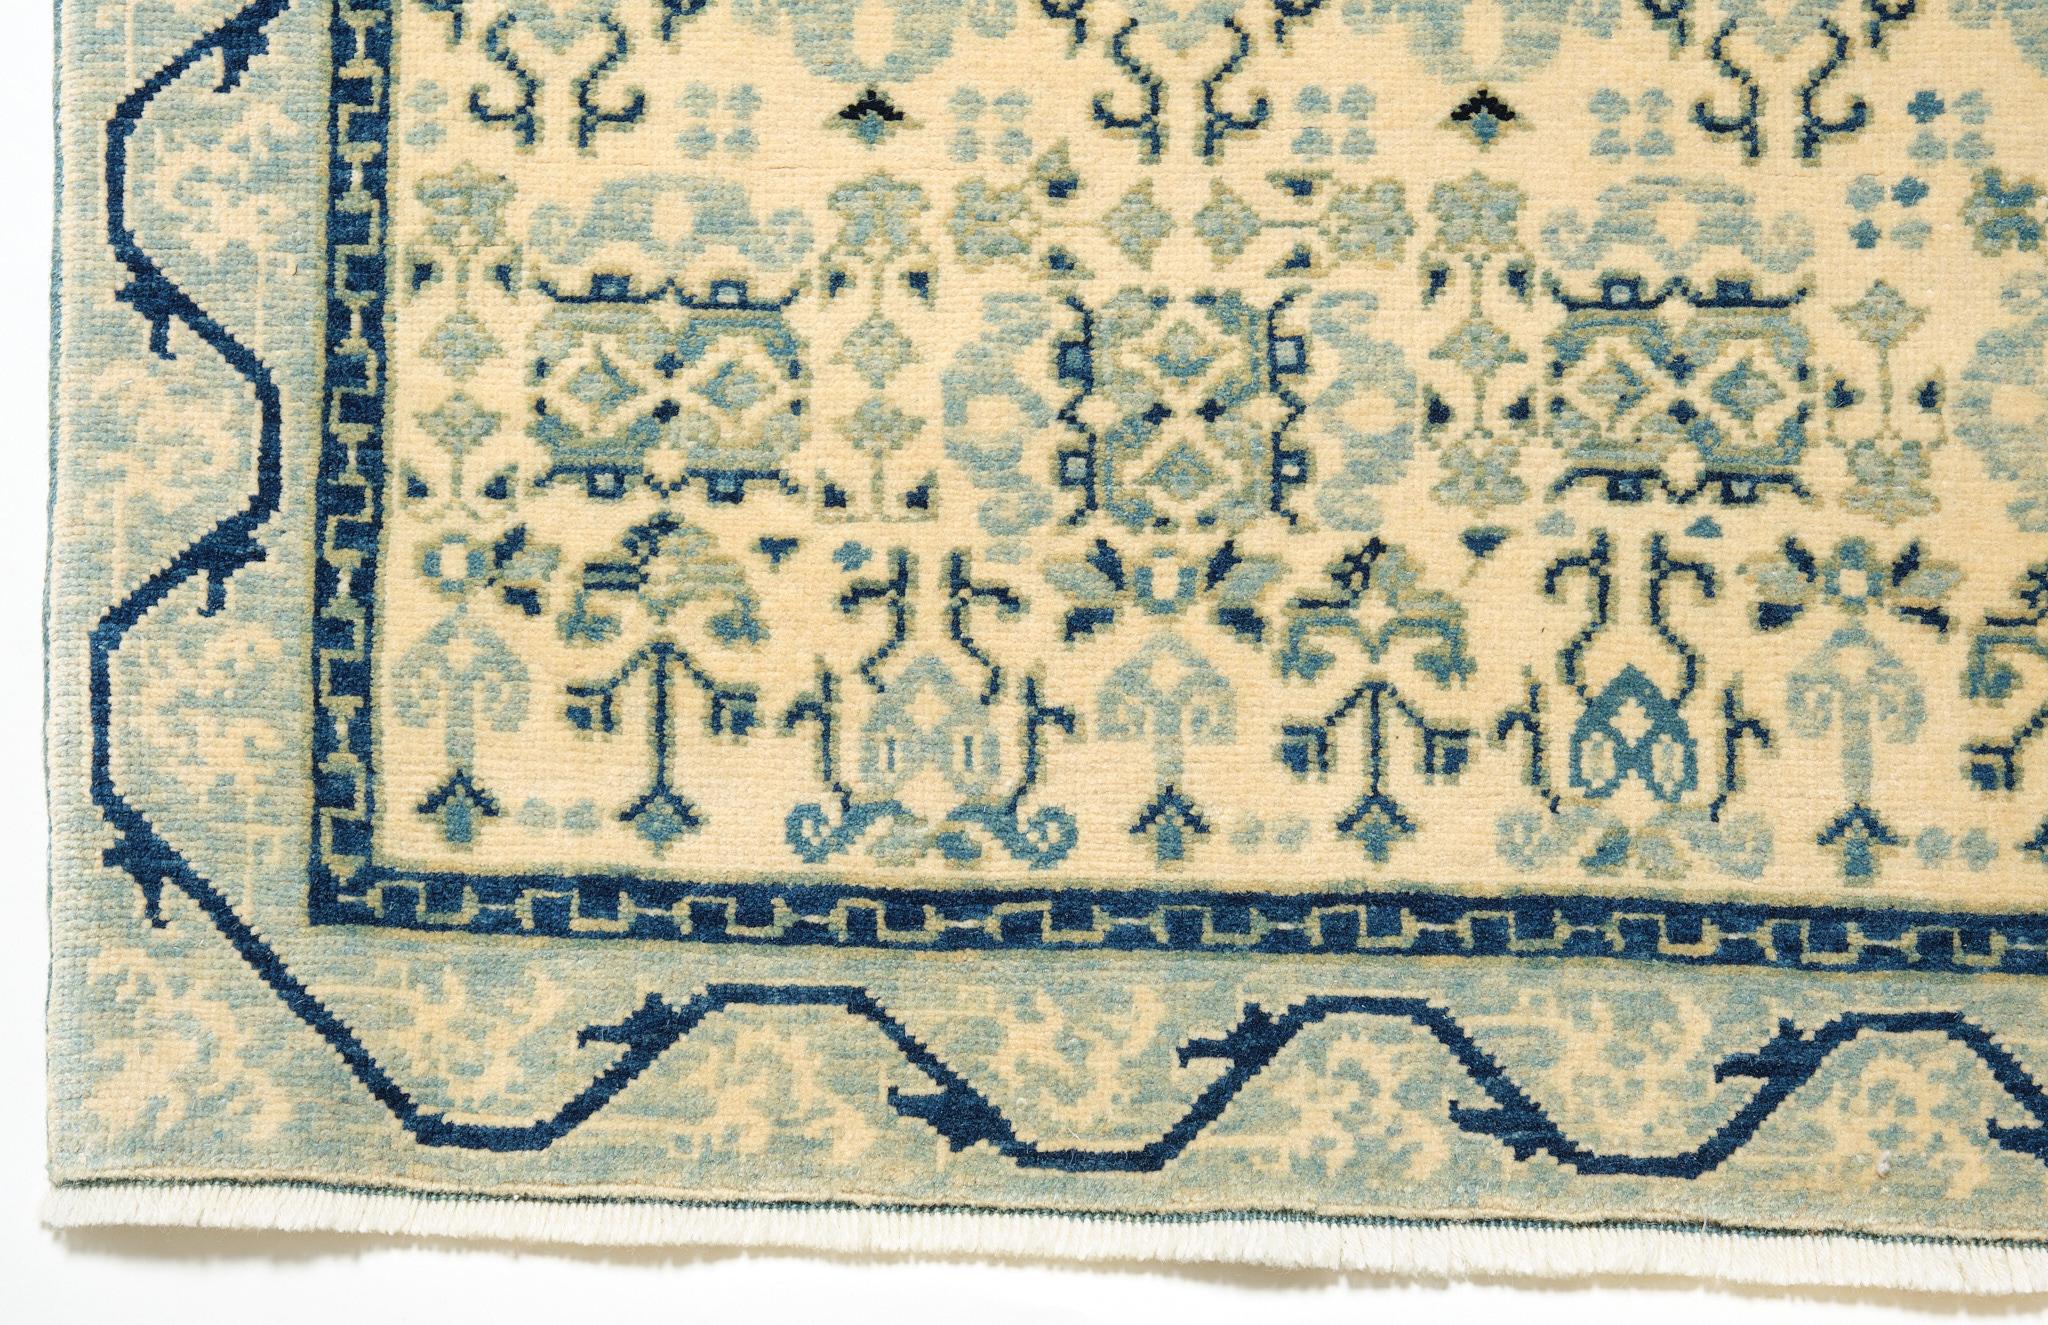 The source of rug comes from the David Collection, Copenhagen. This rug with the Cusped Medallion was designed in the early 16th-century rug by Mamluk Sultane of Cairo, Egypt. Once in the Hirth Collection, and later with Ulrich Schürmann in 1965,